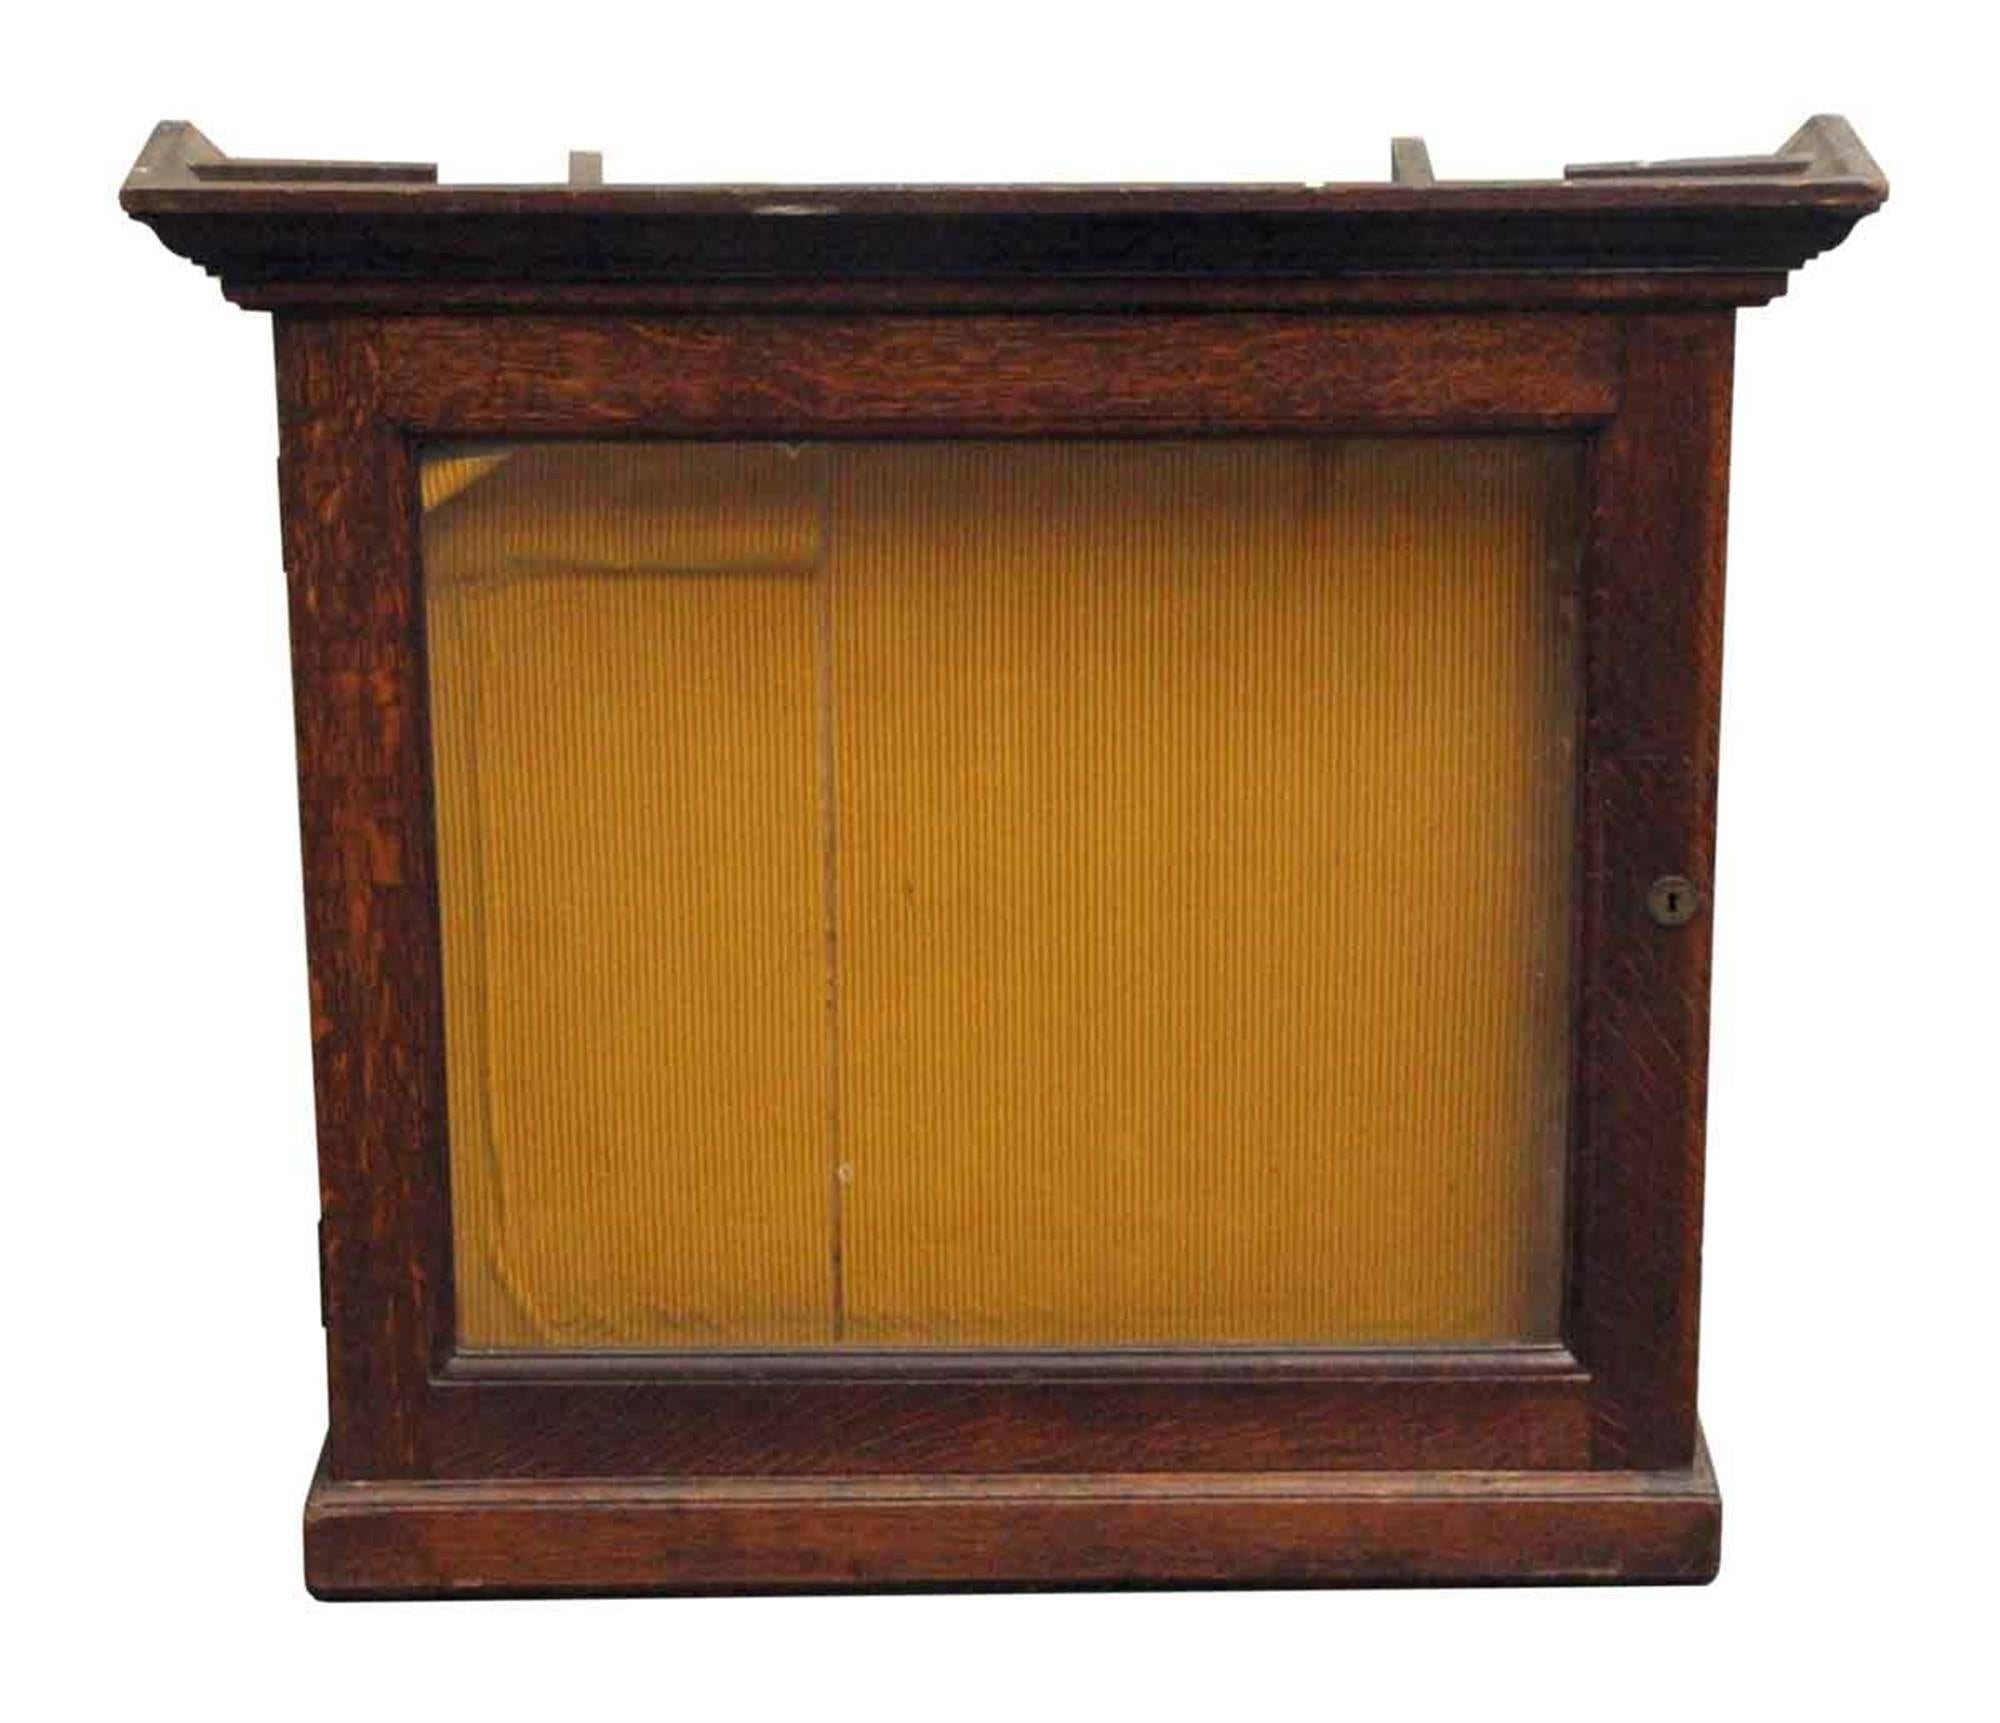 Dark wood tone 1930s French oak display case with key. This can be seen at our 400 Gilligan St location in Scranton, PA.